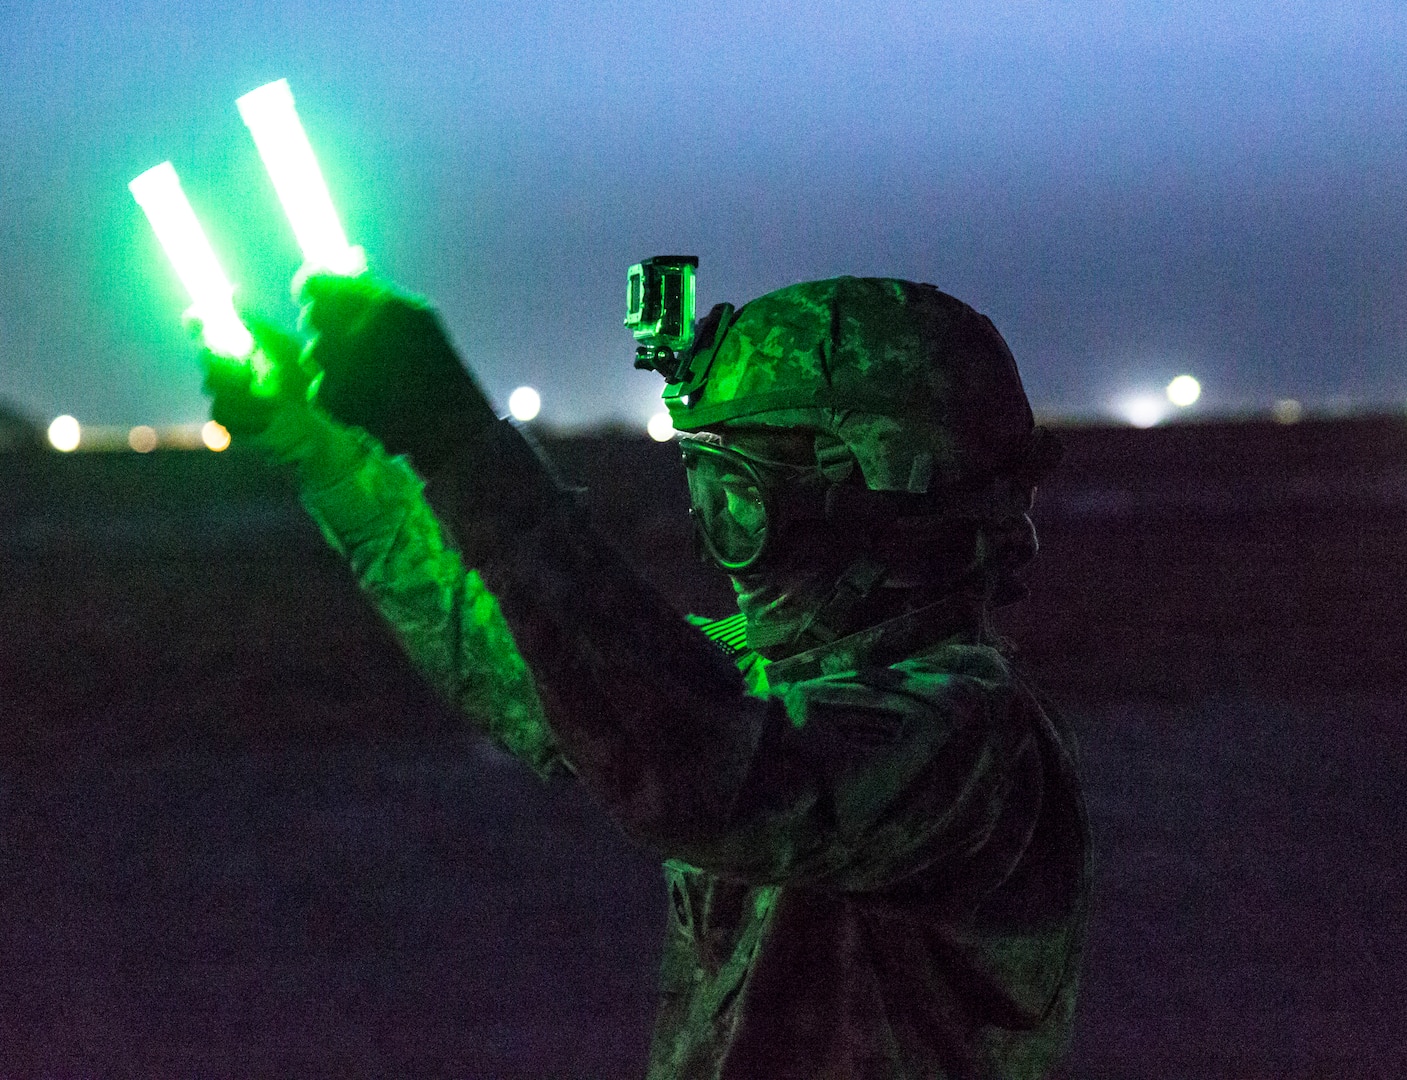 Sgt. 1st Class Joann Duclose, a senior human resources sergeant from the 642nd Aviation Support Battalion, flags in a UH-60 Black Hawk during night sling-load training with aviators from 3rd Battalion, 142nd Assault Helicopter Battalion, June 5, 2014, in Camp Buehring, Kuwait, during the battalion's 2014 deployment. Soldiers of the 642nd Aviation Support Battalion will deploy to the Middle East again in 2023.